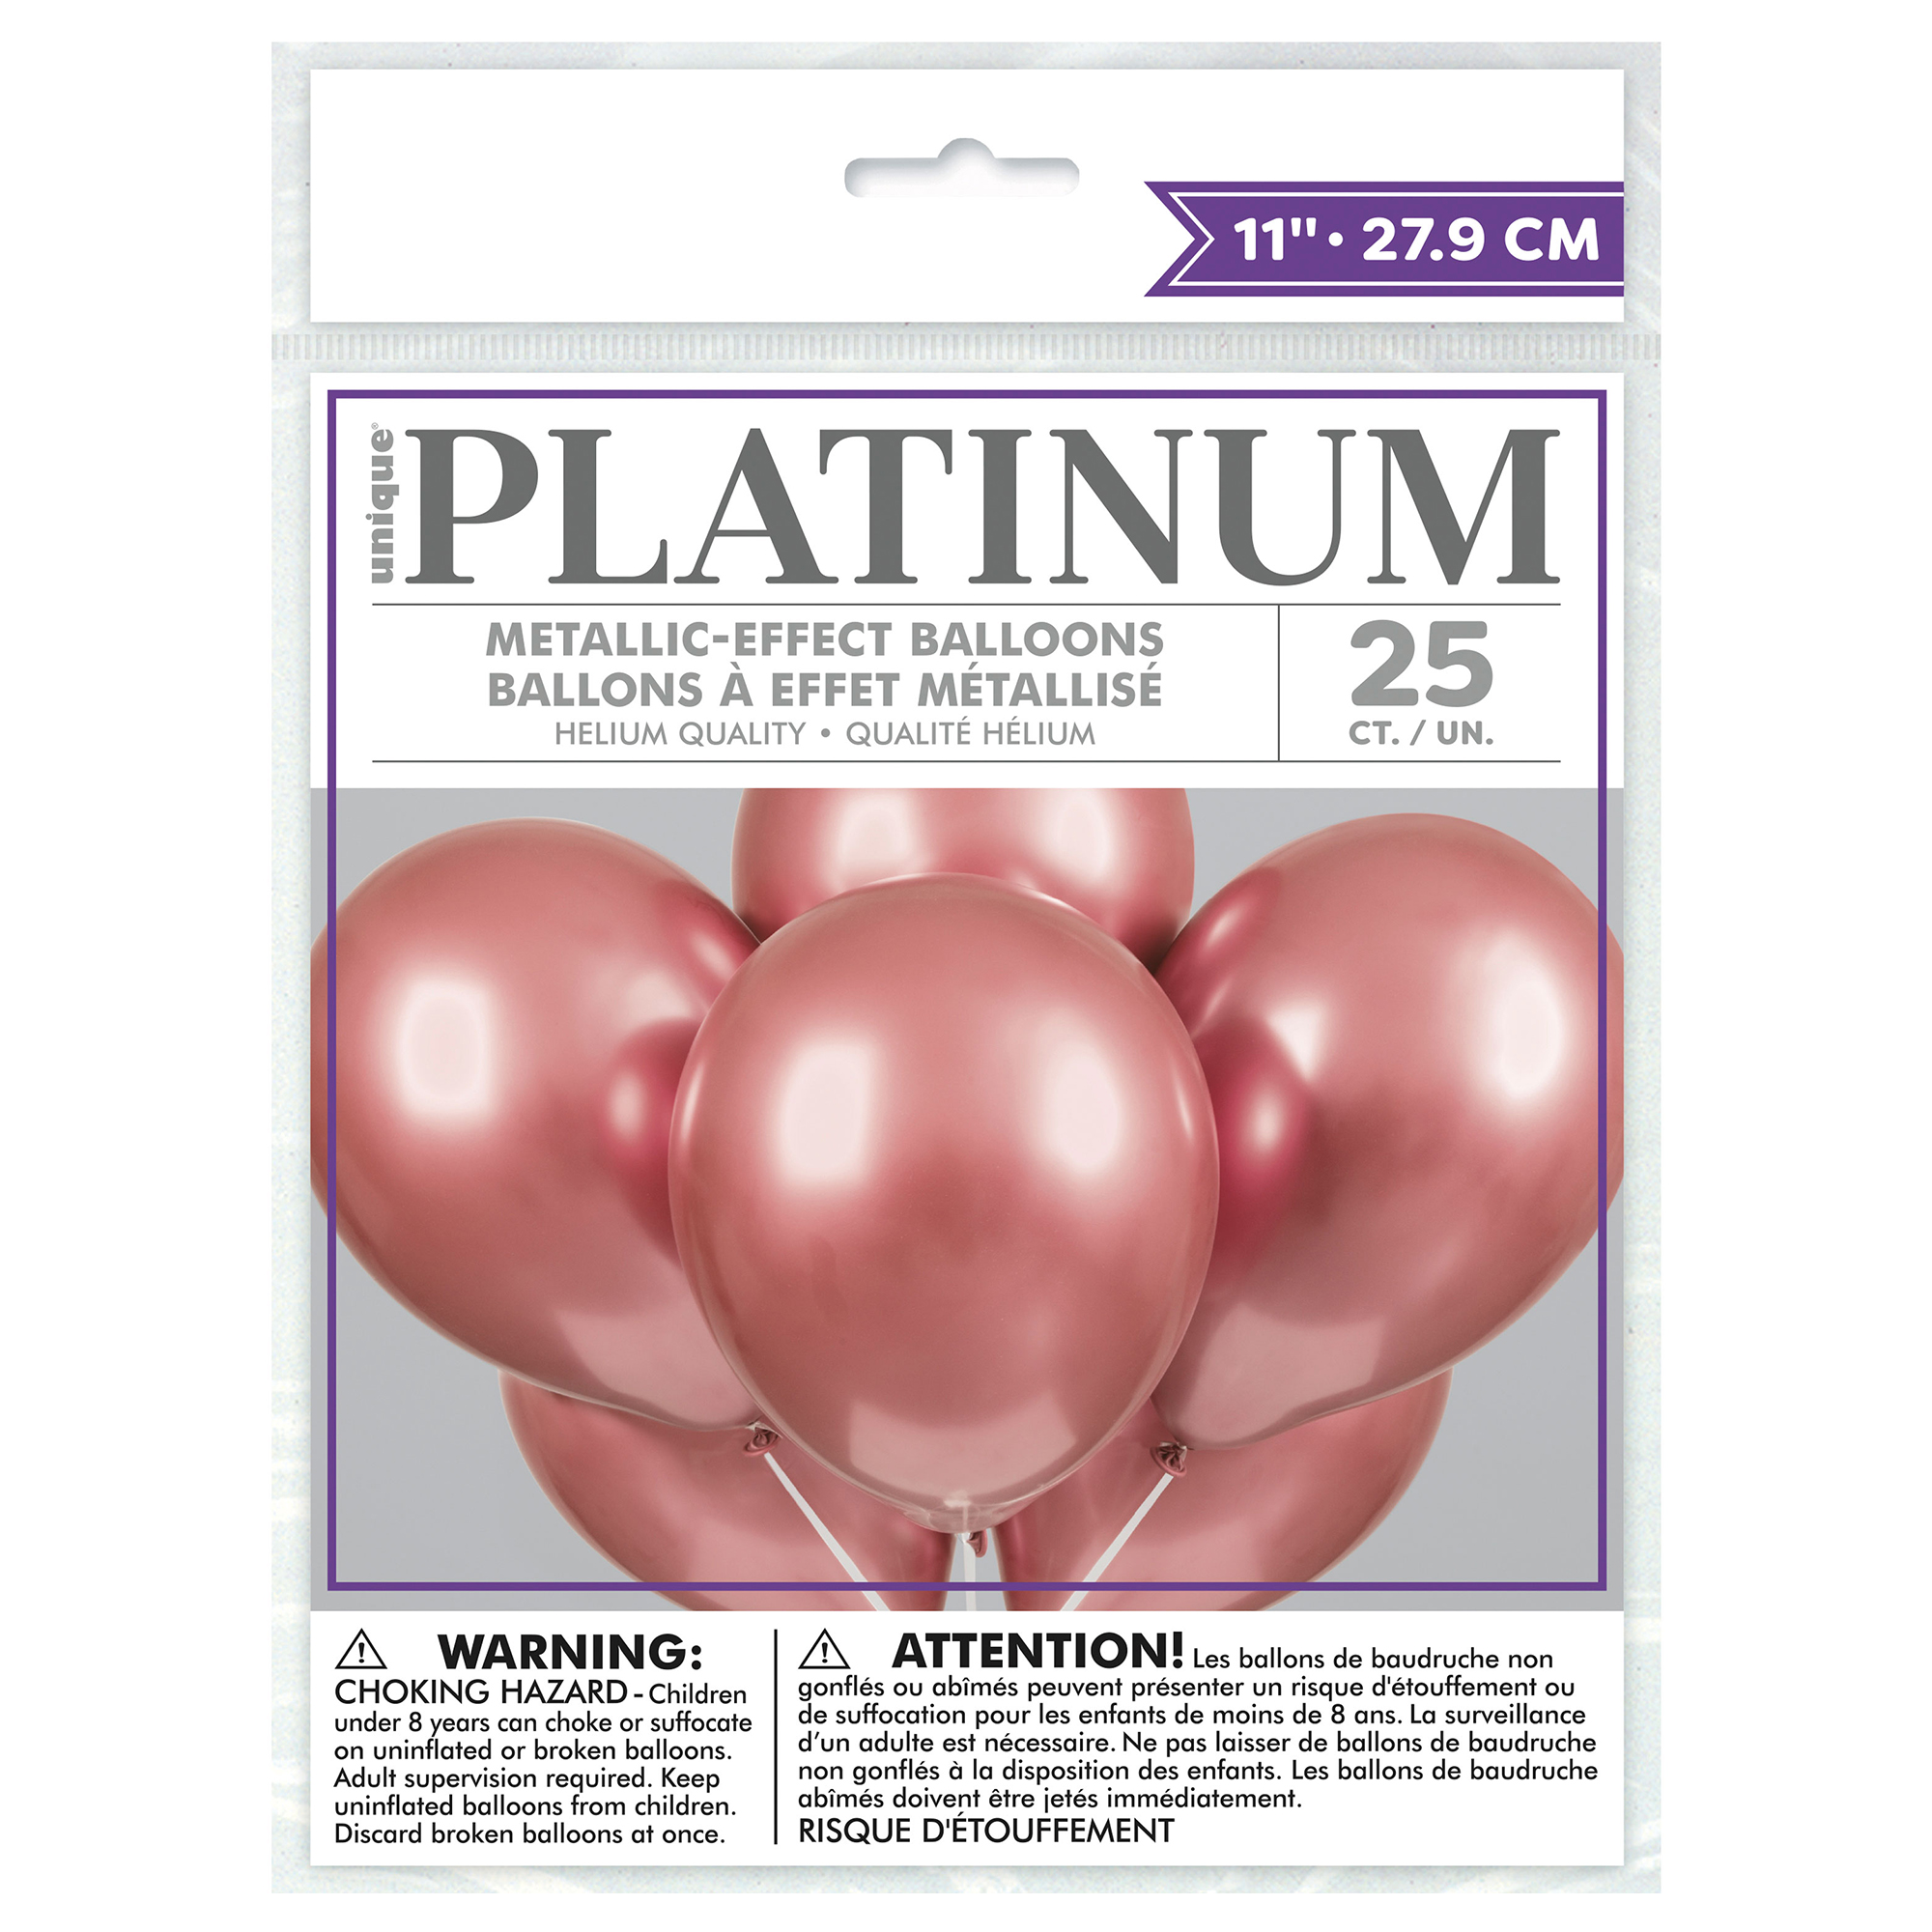 11-Inch Rose Gold Latex Balloons - Pack of 25